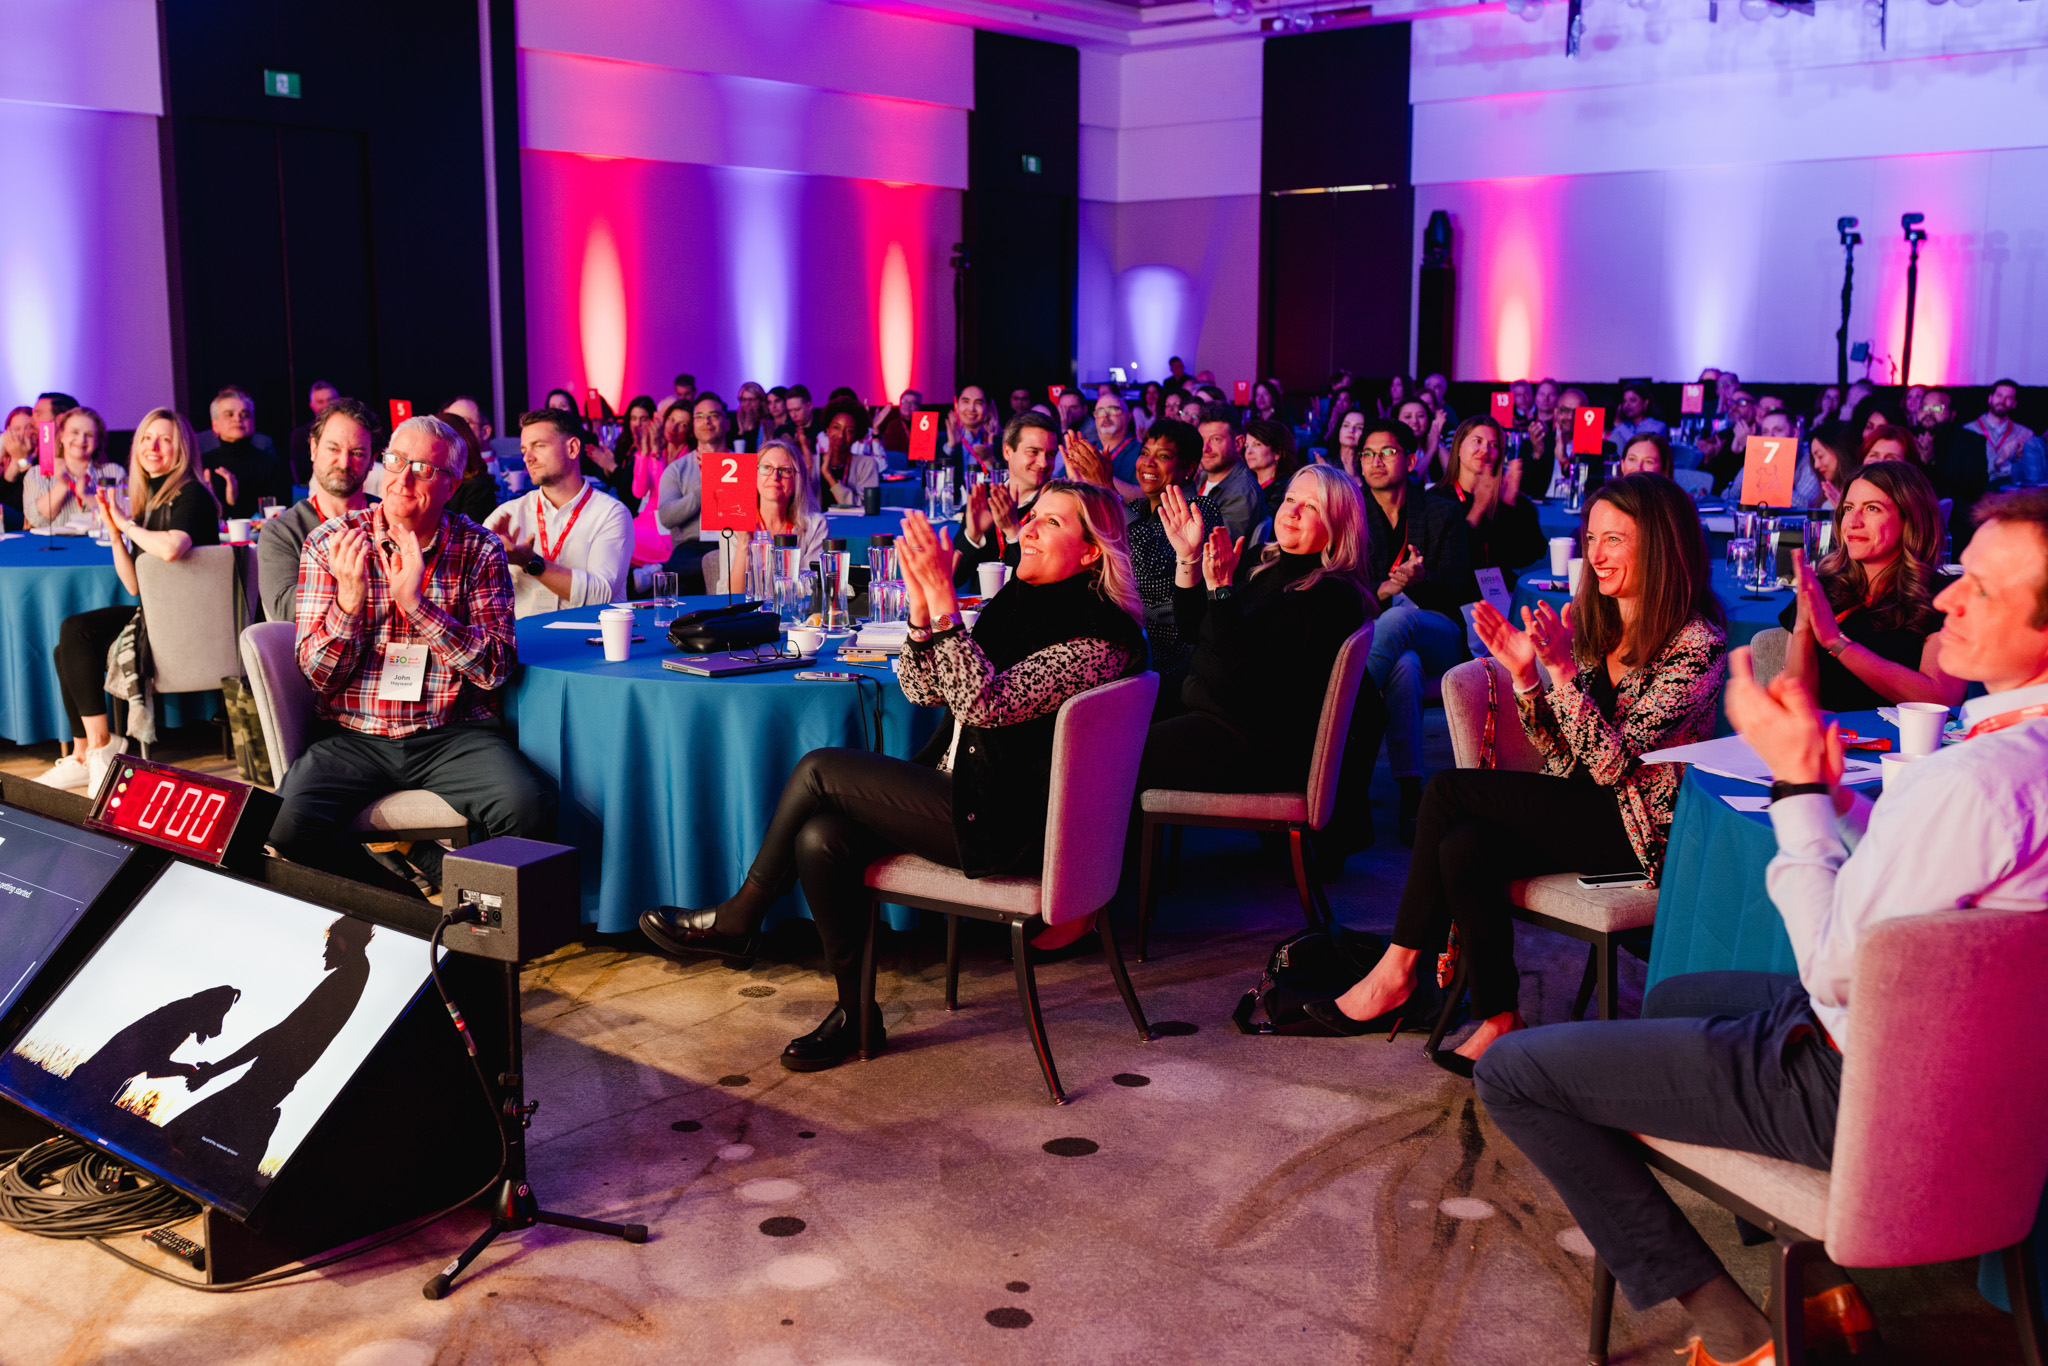 A large audience sits at round tables in a conference room, clapping and facing a presentation screen. The room, captured through corporate photography, is lit with colorful lights in blue and red tones.